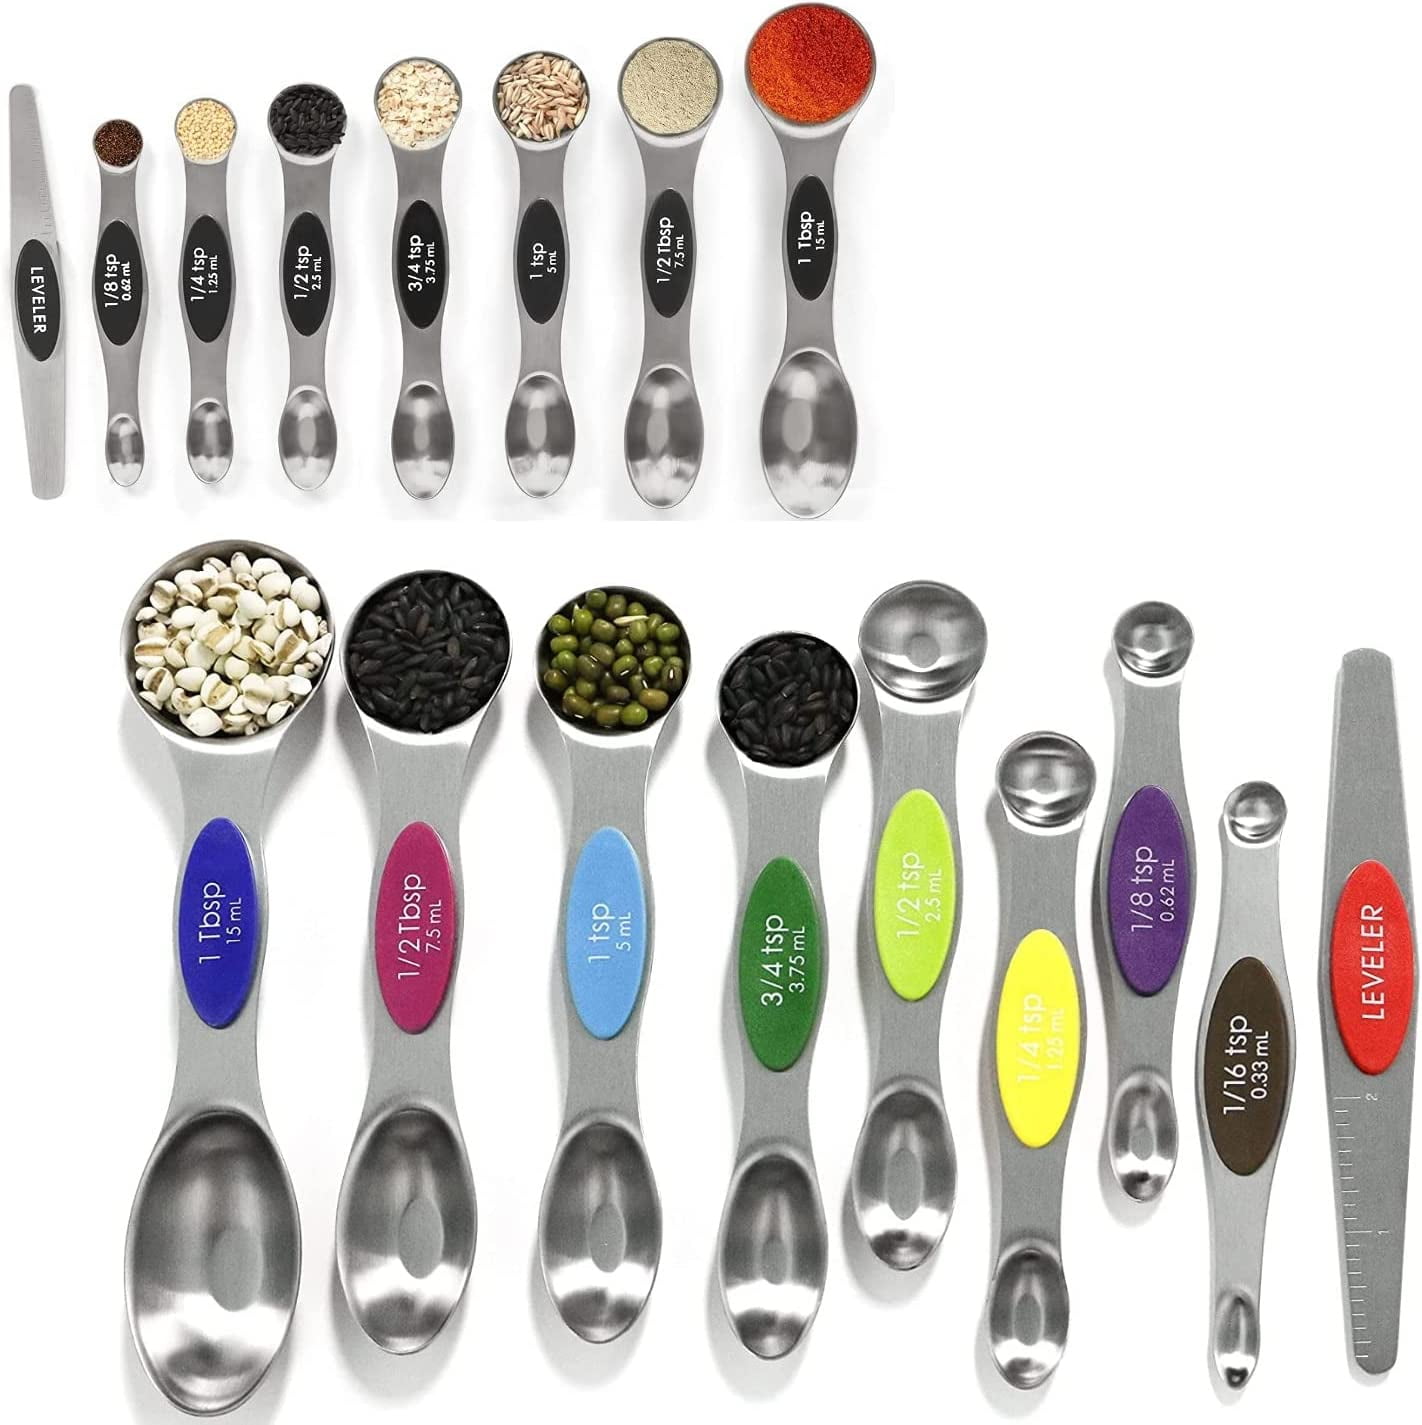 Magnetic Measuring Cups And Spoons Set Including 7 Measuring Cup 7 Measuring  Spoons With 1 Leveler